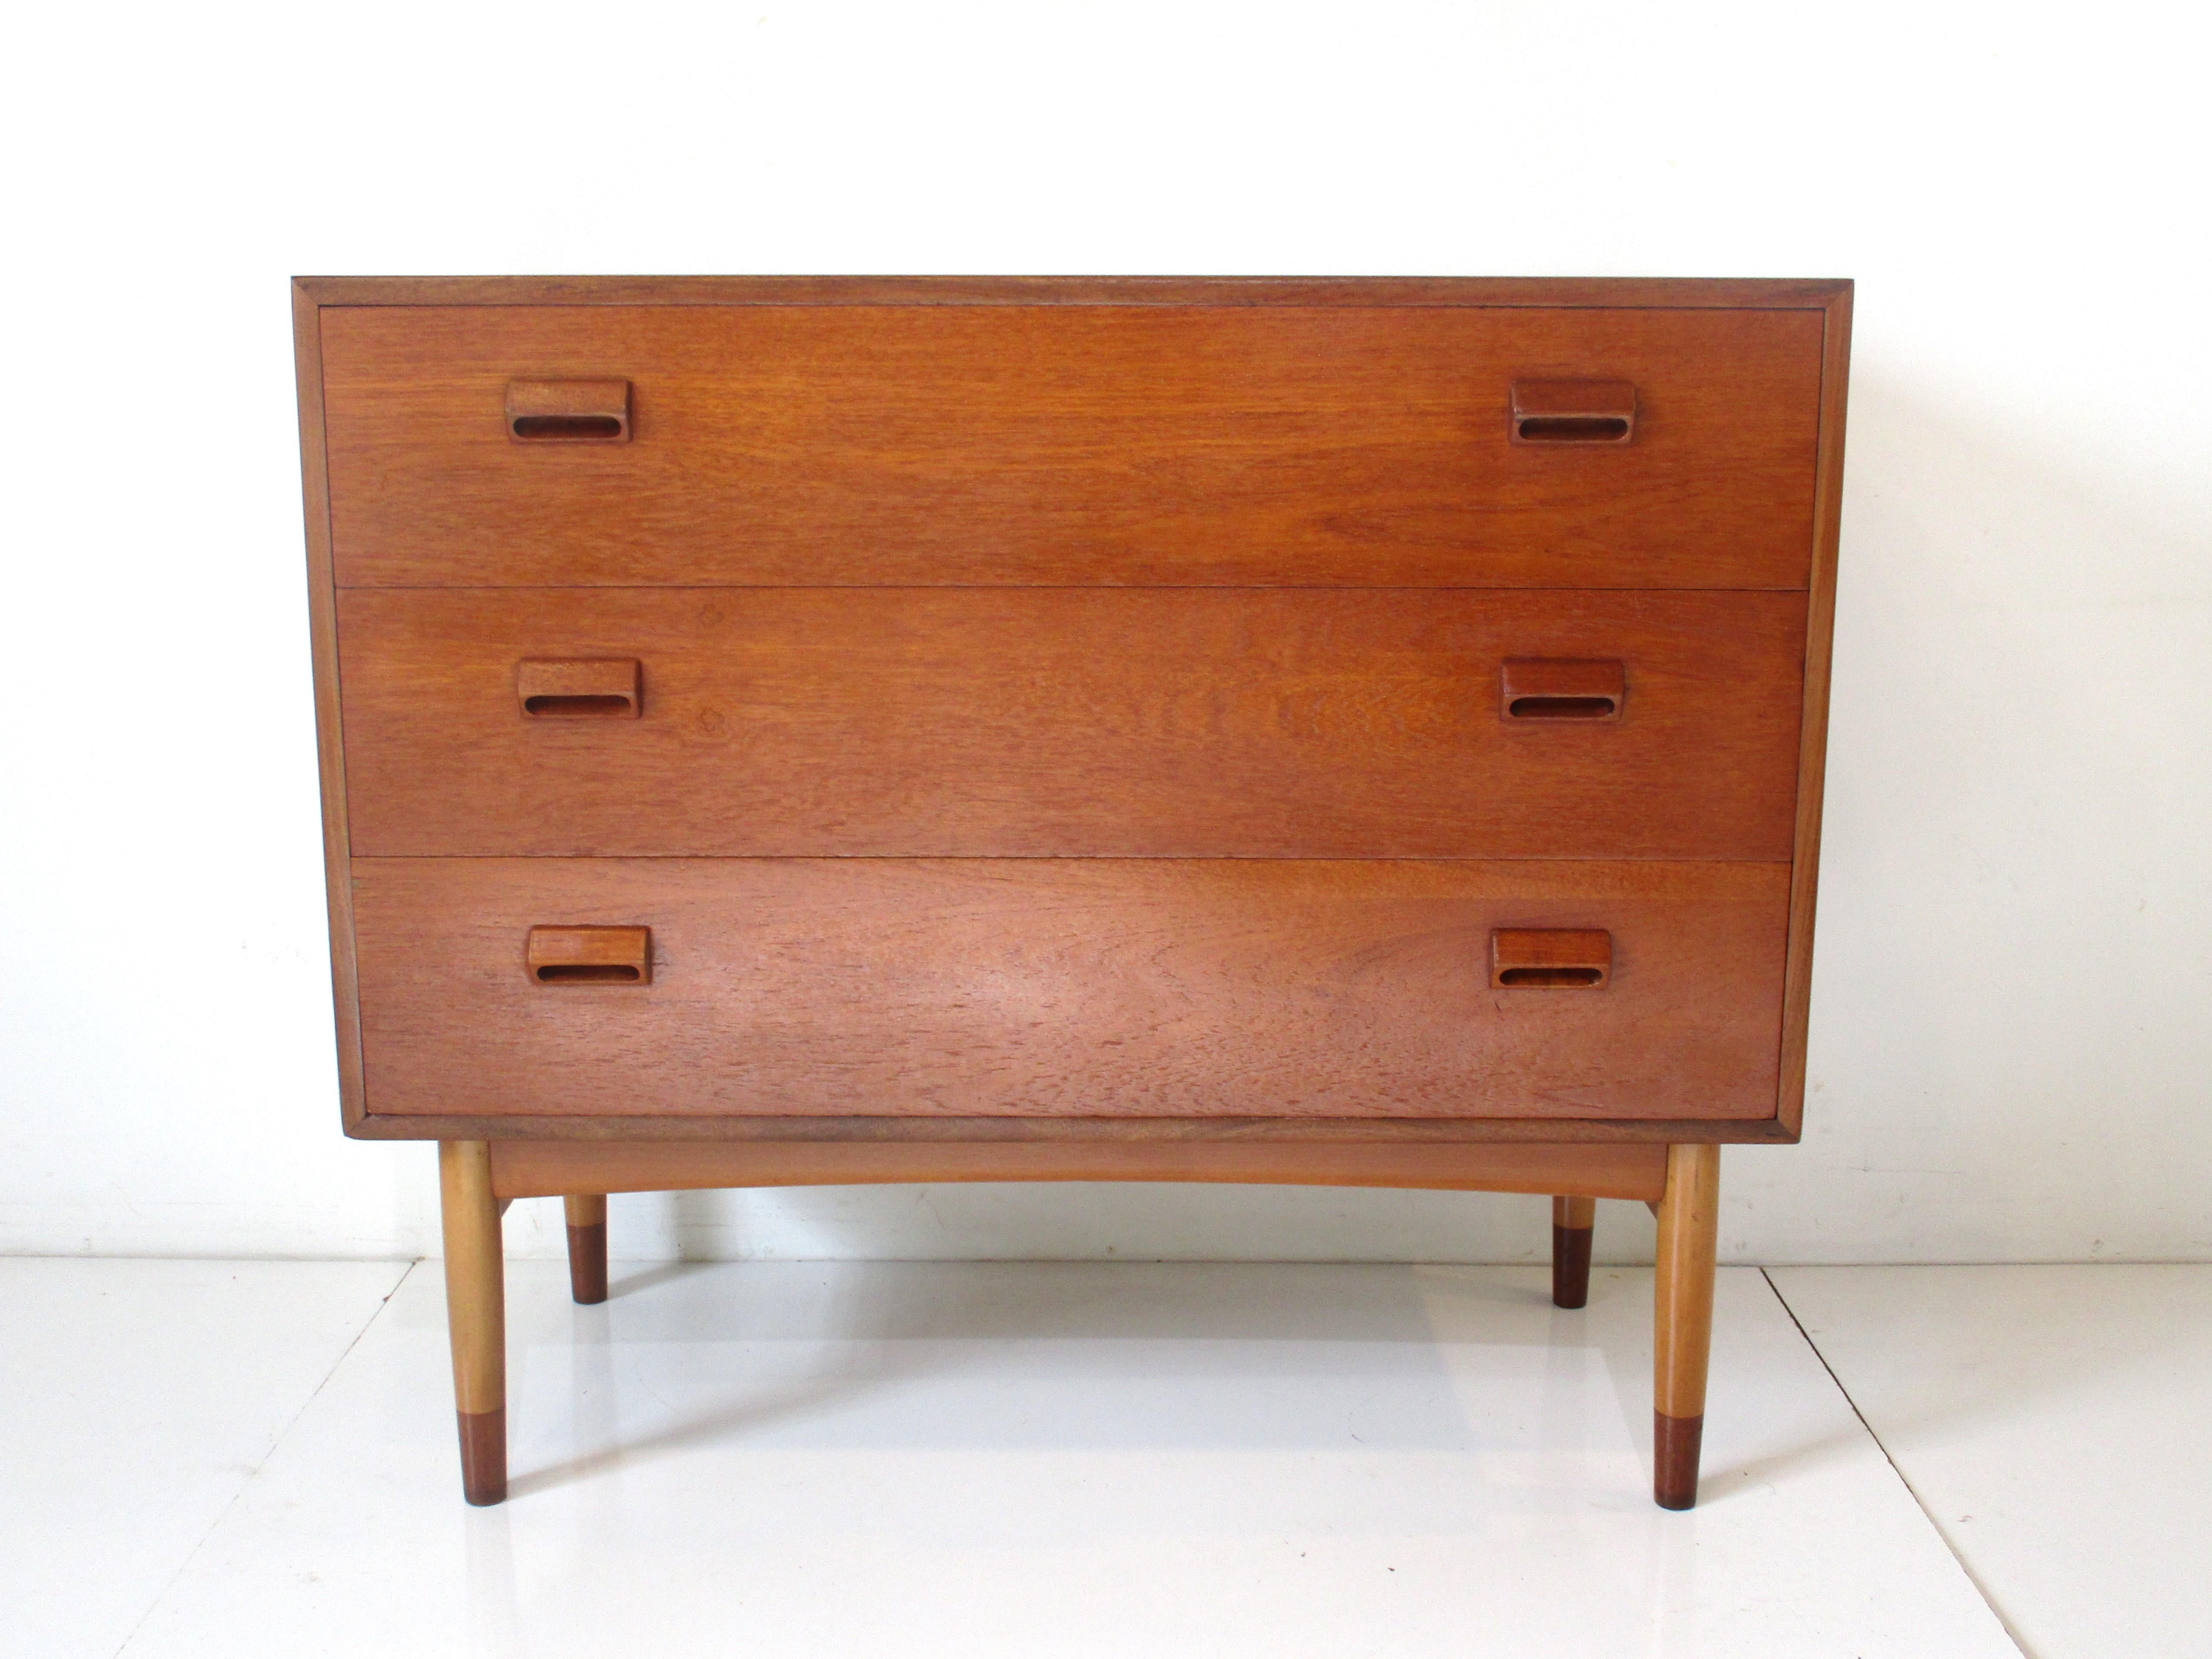 A very well designed teak wood vanity dresser with a top drawer that has a pull out and flip up mirror. The front of the piece folds down revealing storage slots to the left and three drawers to the other side. The two bottom drawers have typical